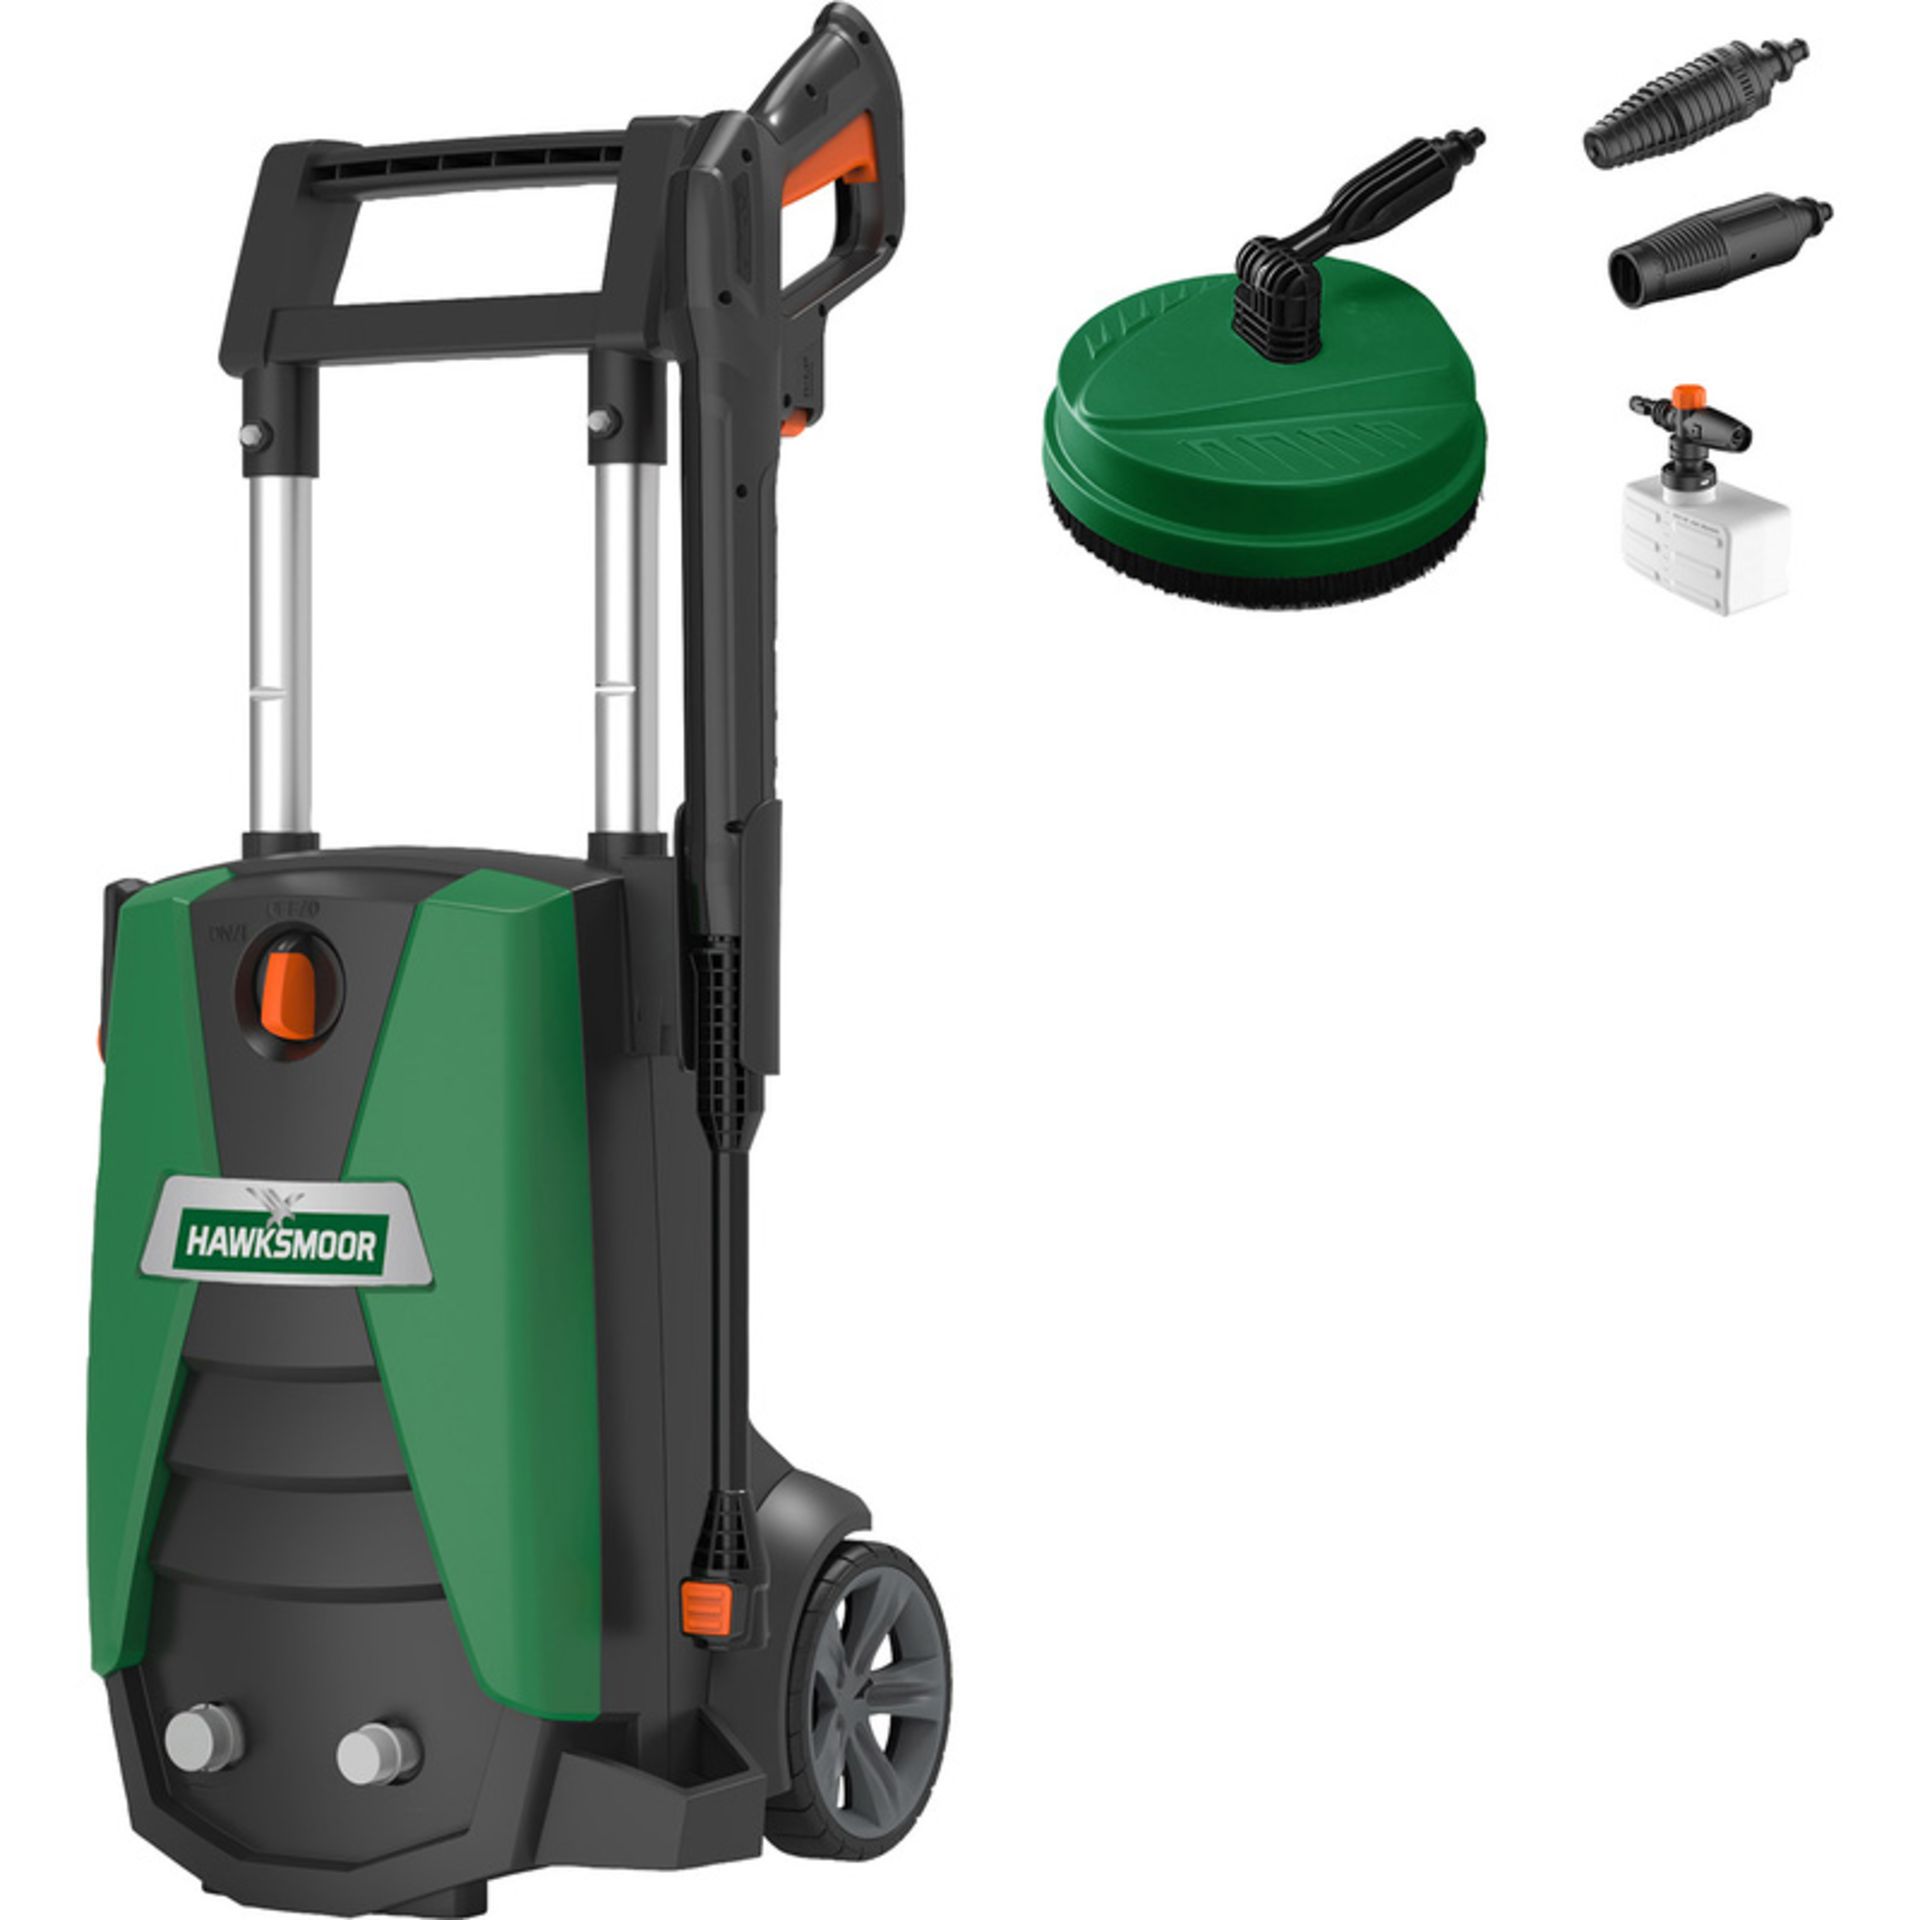 4 x Hawksmoor High Pressure Washer 140bar. - ER32. Compact design with space-saving integrated